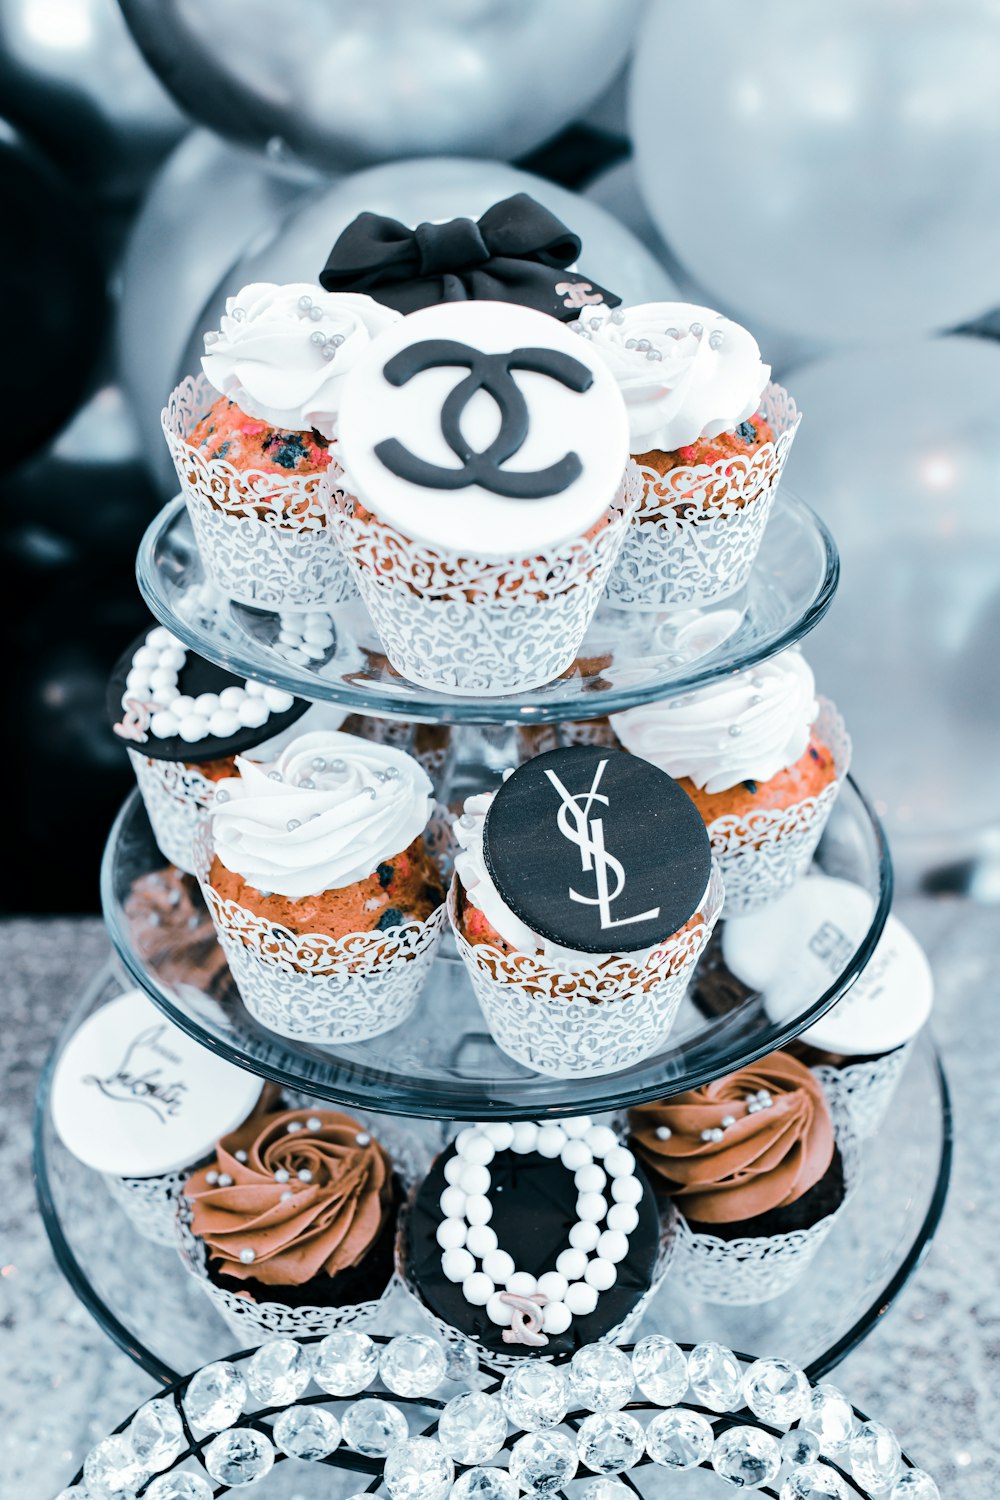 Cupcakes on clear glass cake stand photo – Free Usa Image on Unsplash